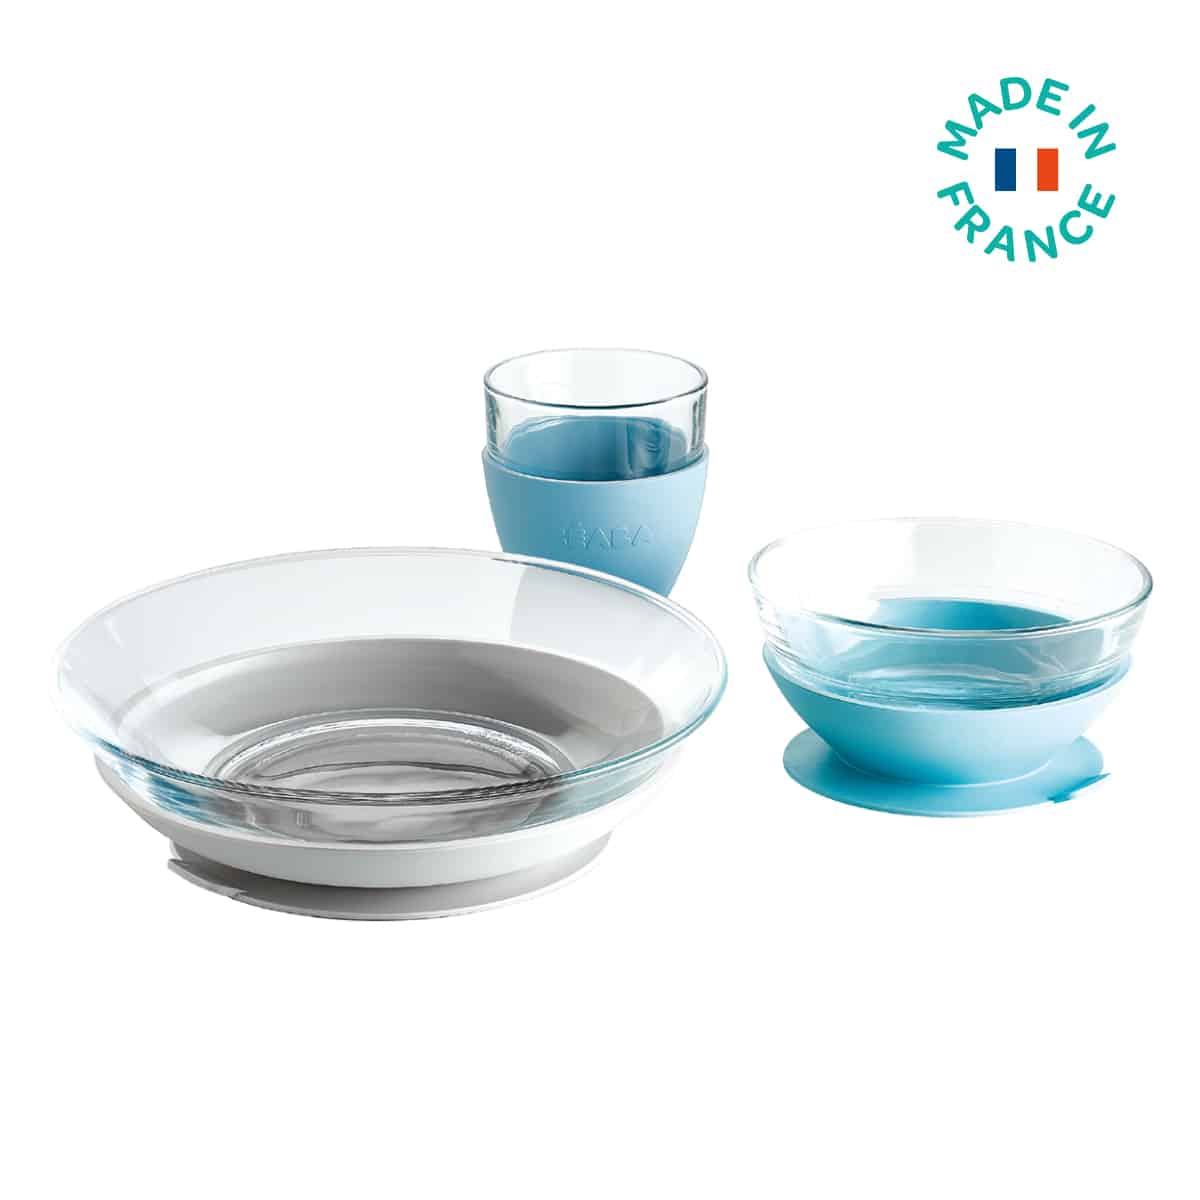 Spoon Bowl and Sipper Cup 3 piece Feeding Set 